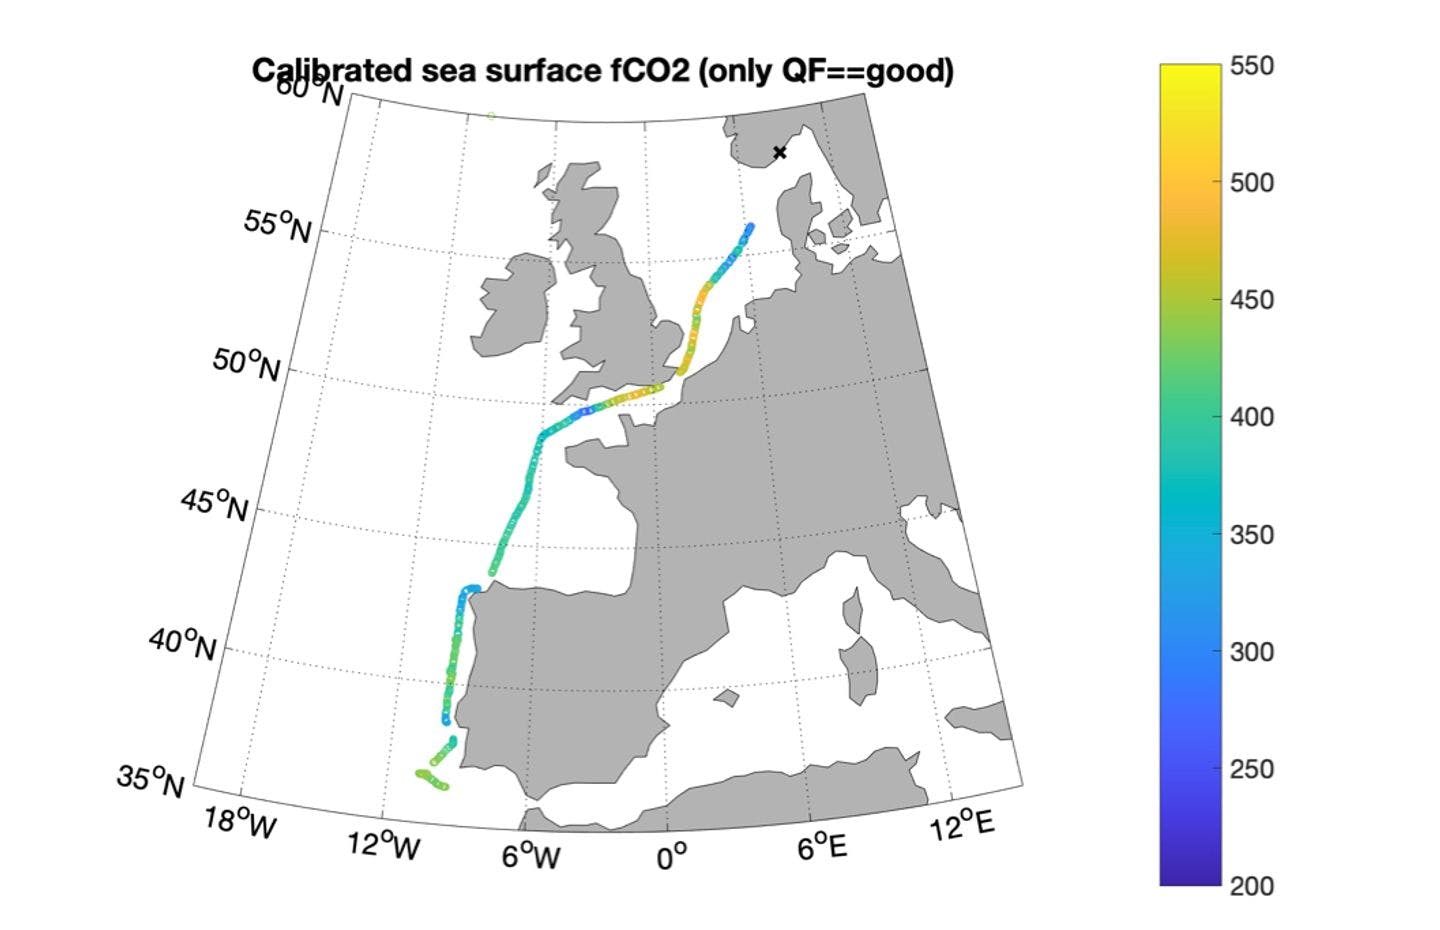 pCO2 of the sea surface